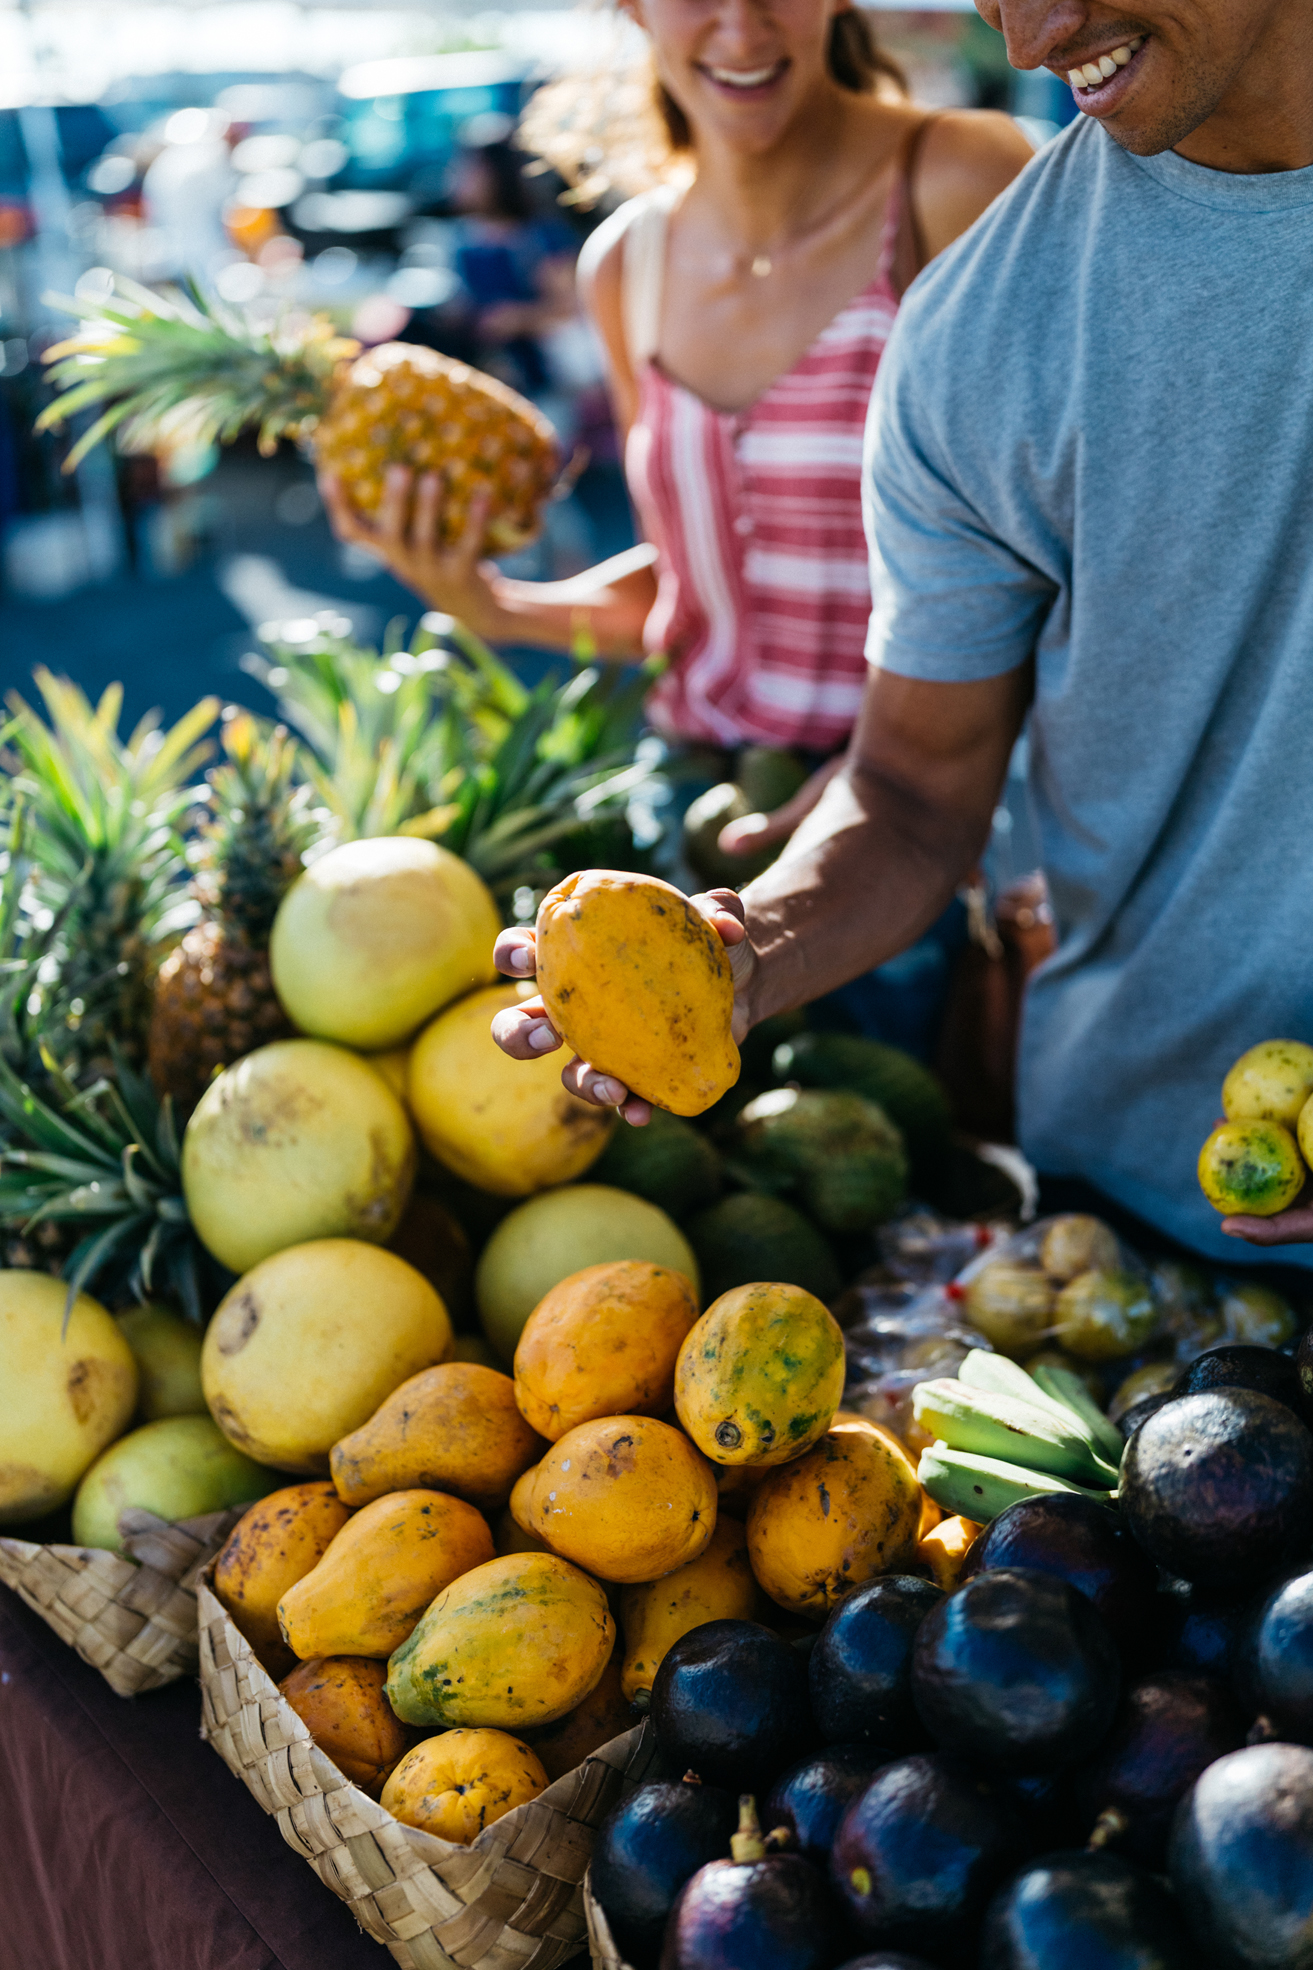 People shopping at a farmers market on Oʻahu